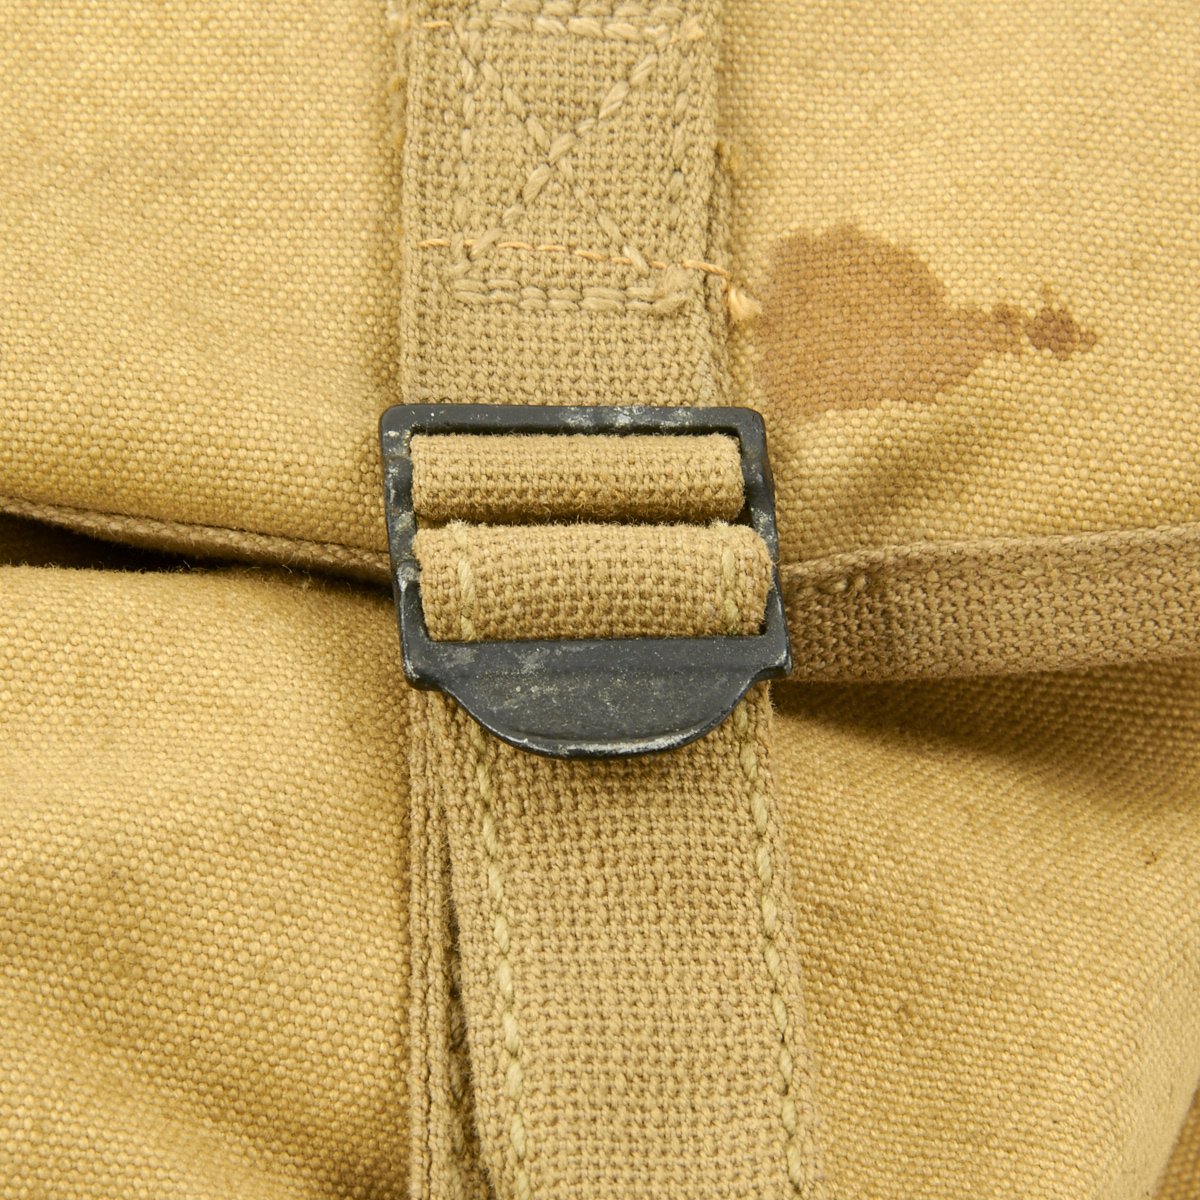 WWI British Made US Army Officers Musette Bag